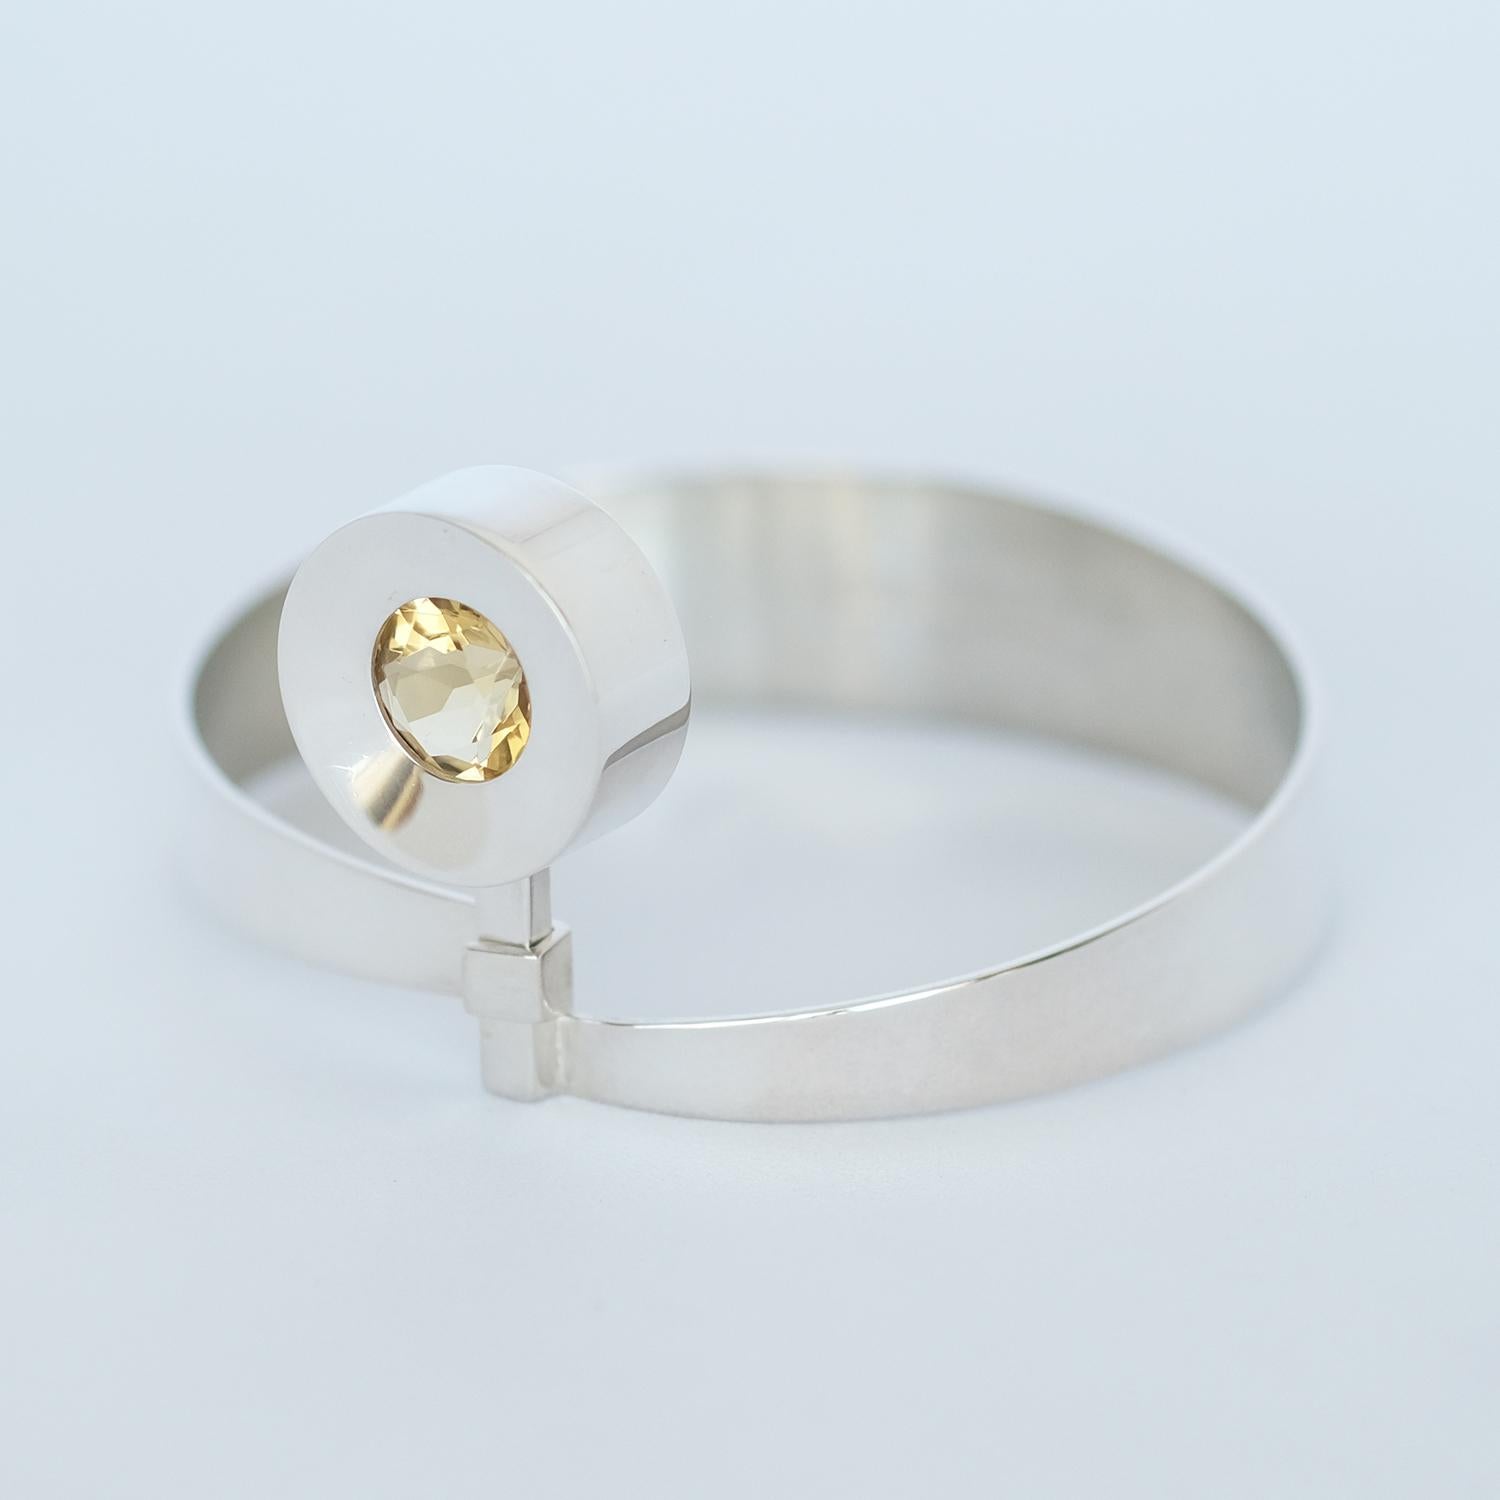 This silver and citrine bangle has a very modern look. At the same time it testifies to the style and grace that applied when it came into life. In our opinion the bangle, with its circular citrine eye, looks like an Egyptian headdress à la